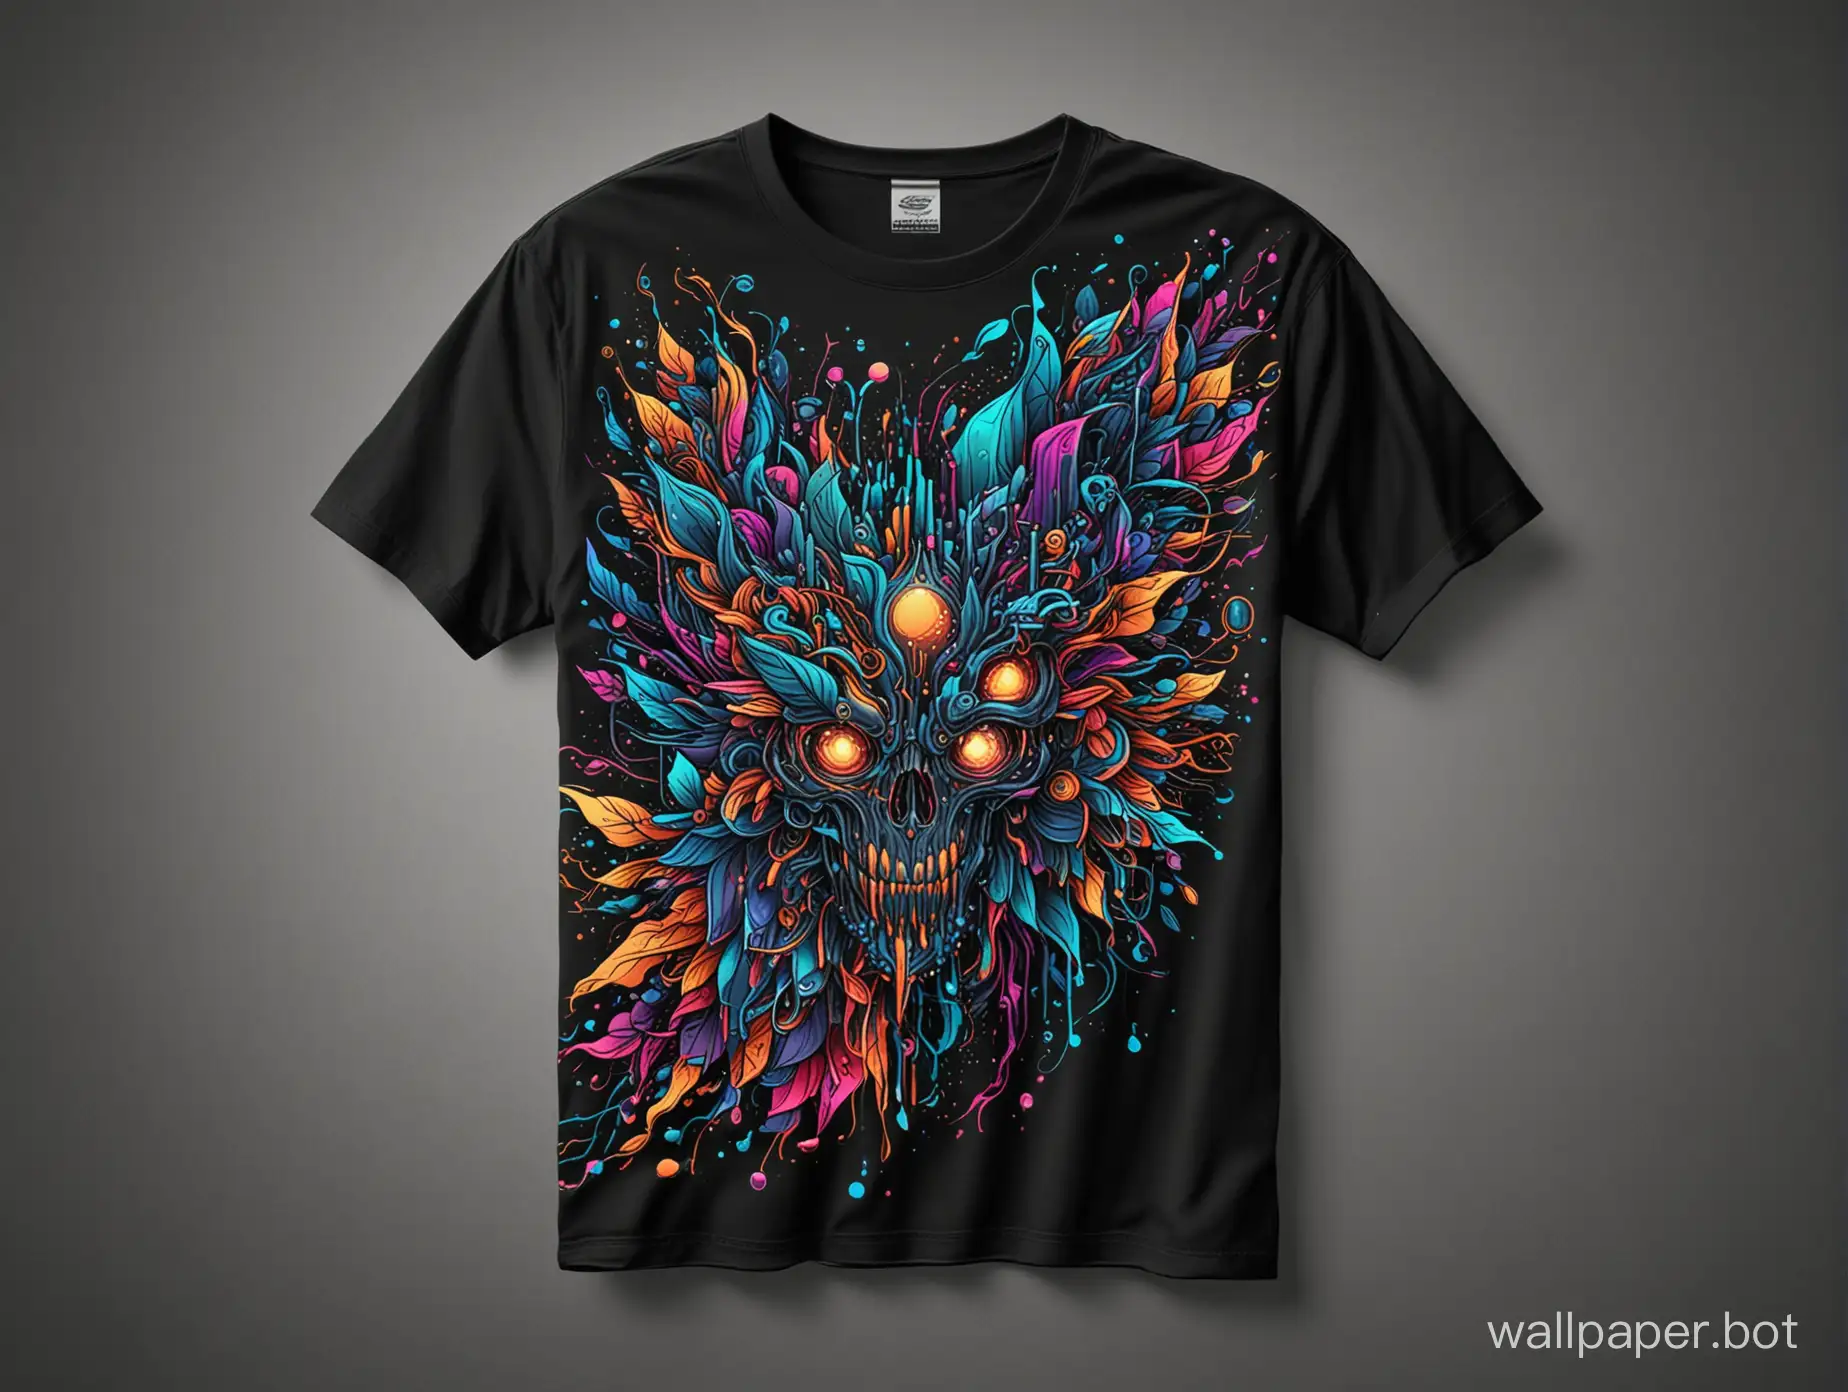 black t shirt mockup template, shirt, botanical art style, colorful abstract cyborg, fluid lineart illustration on shirt, constrast lineart, explosive colors